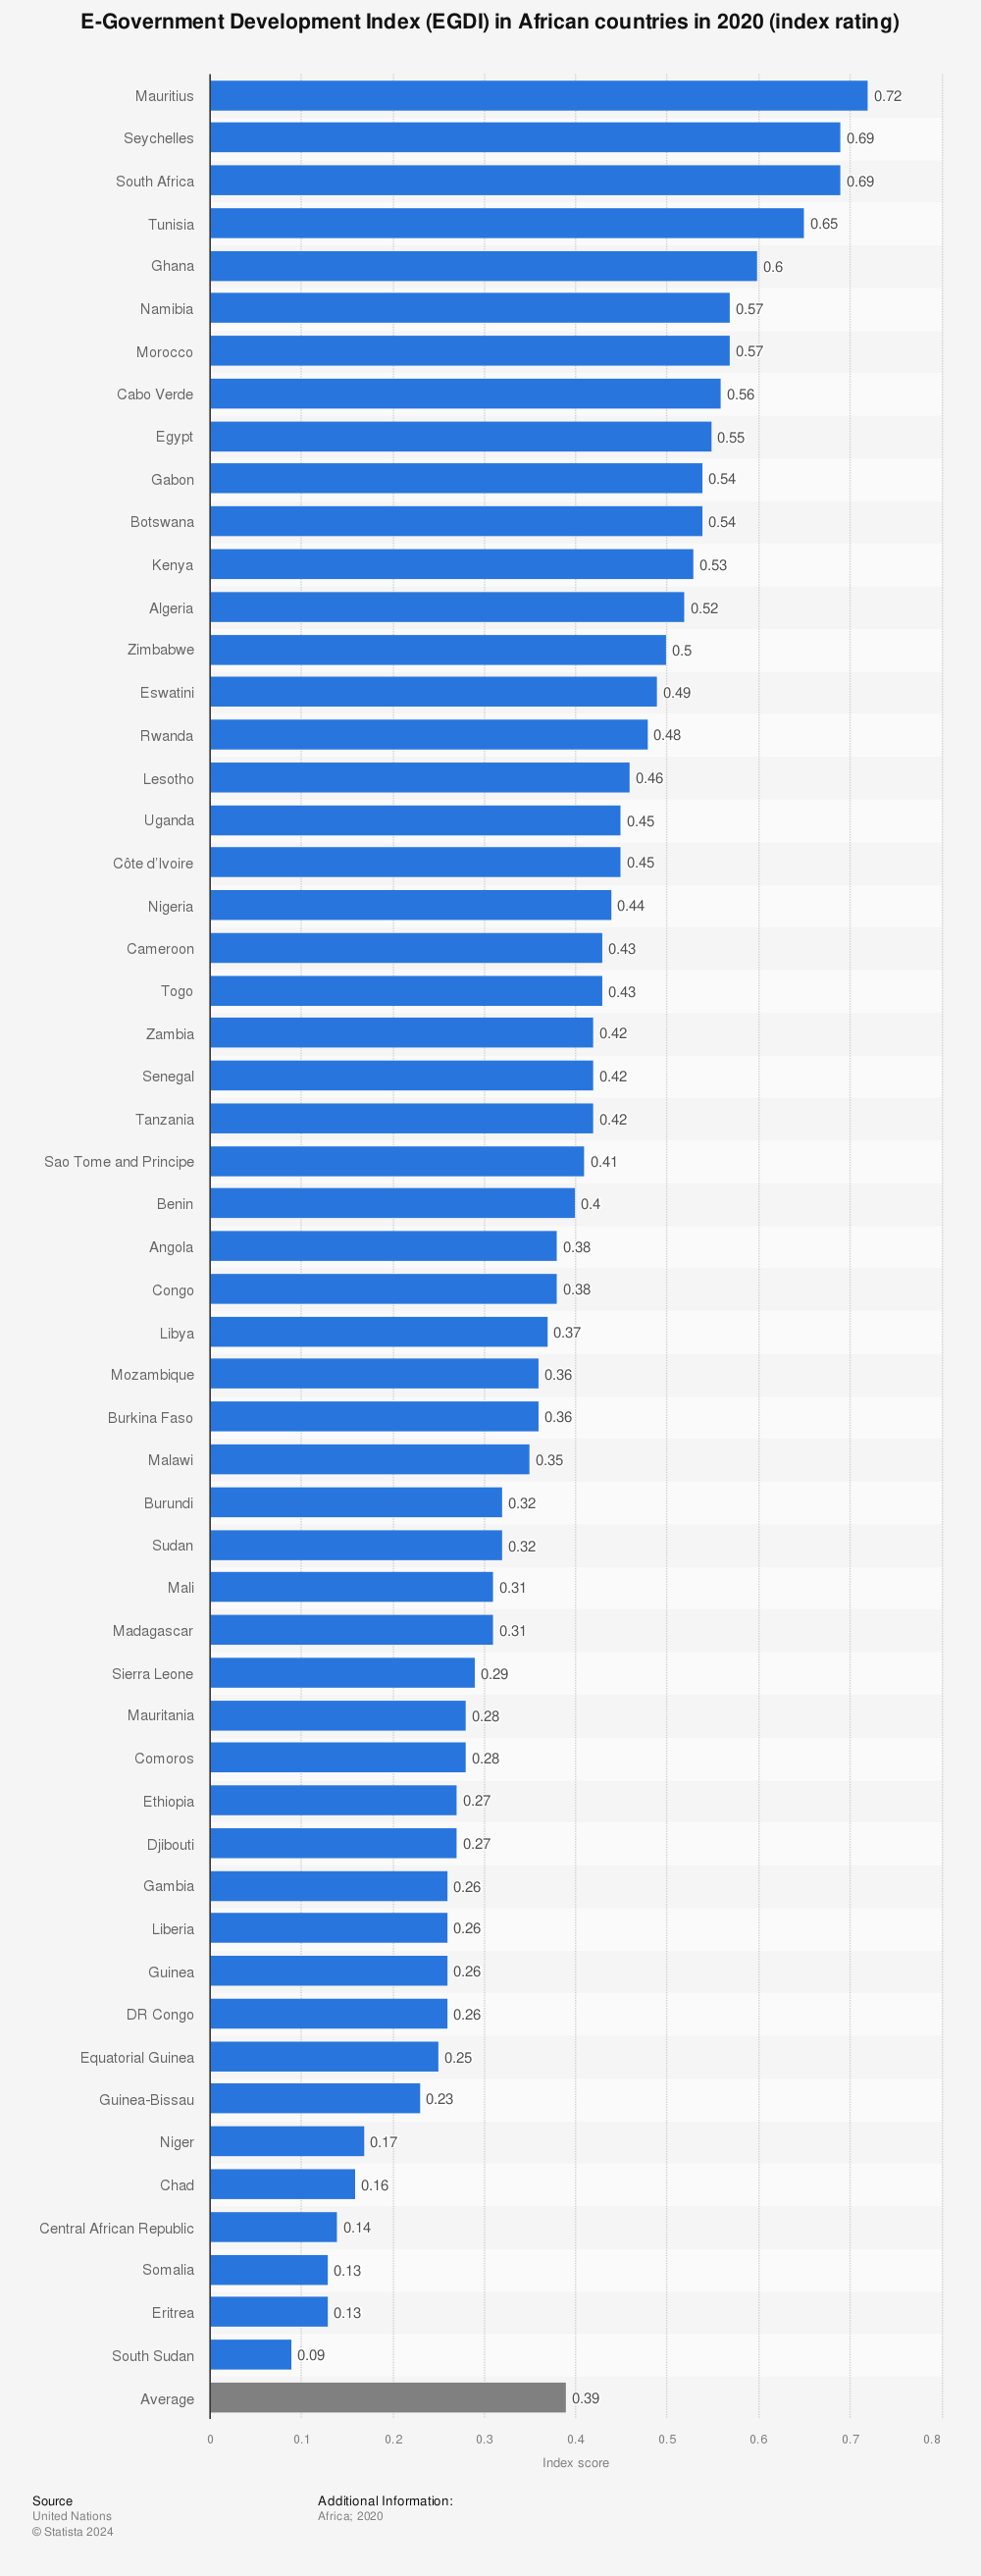 Statistic: E-Government Development Index (EGDI) in African countries in 2020 (index rating) | Statista